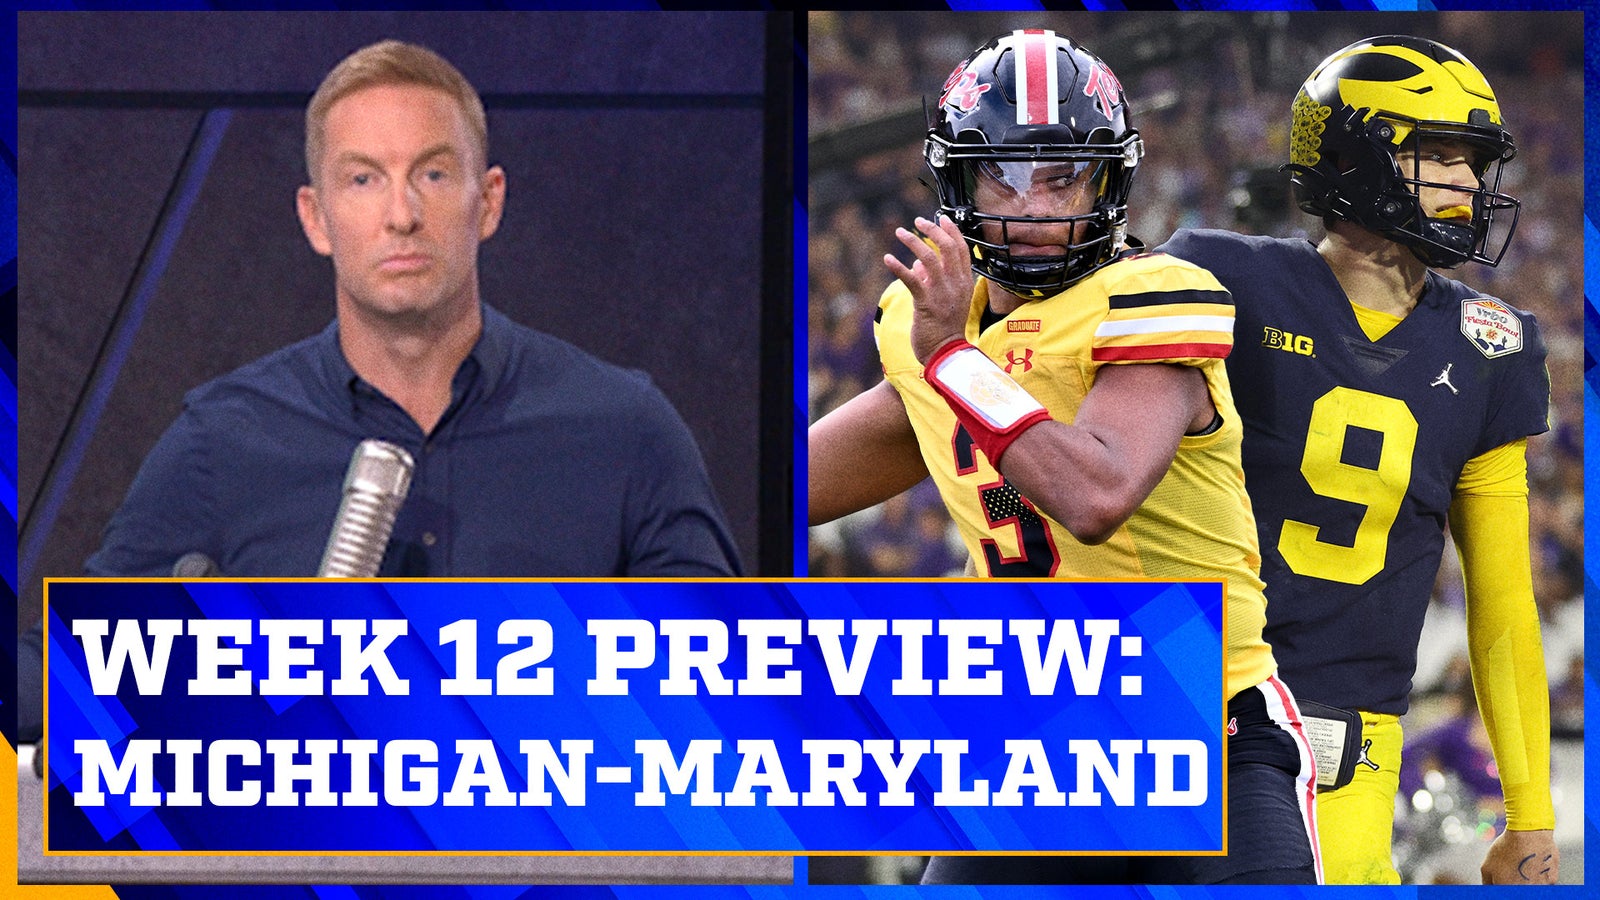 Will Michigan stay undefeated against Maryland?